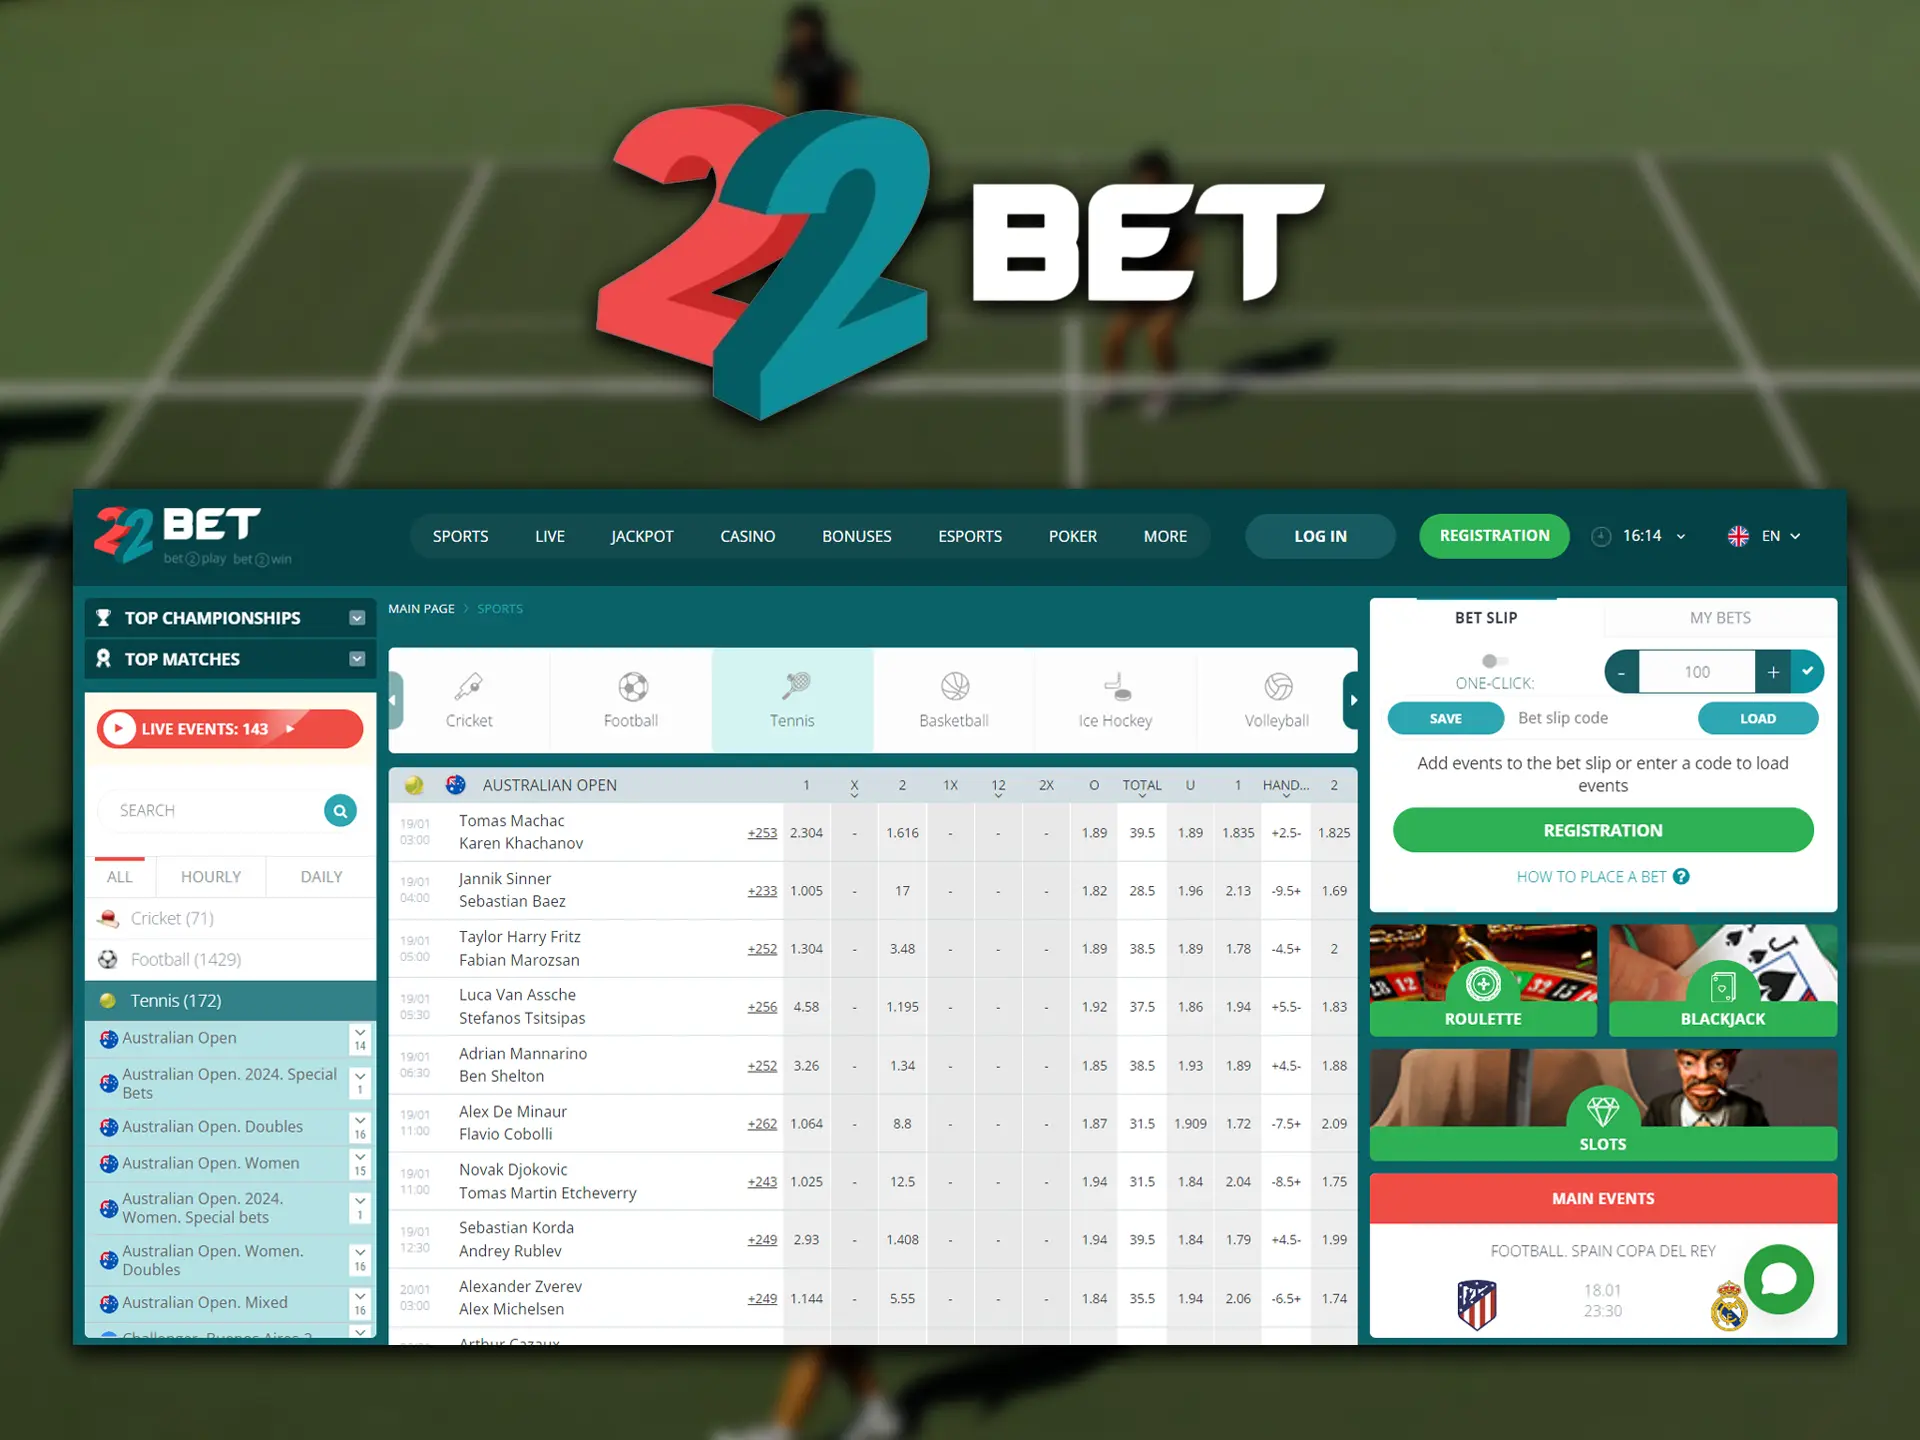 Register on the 22Bet platform, claim your welcome bonus and bet on tennis.